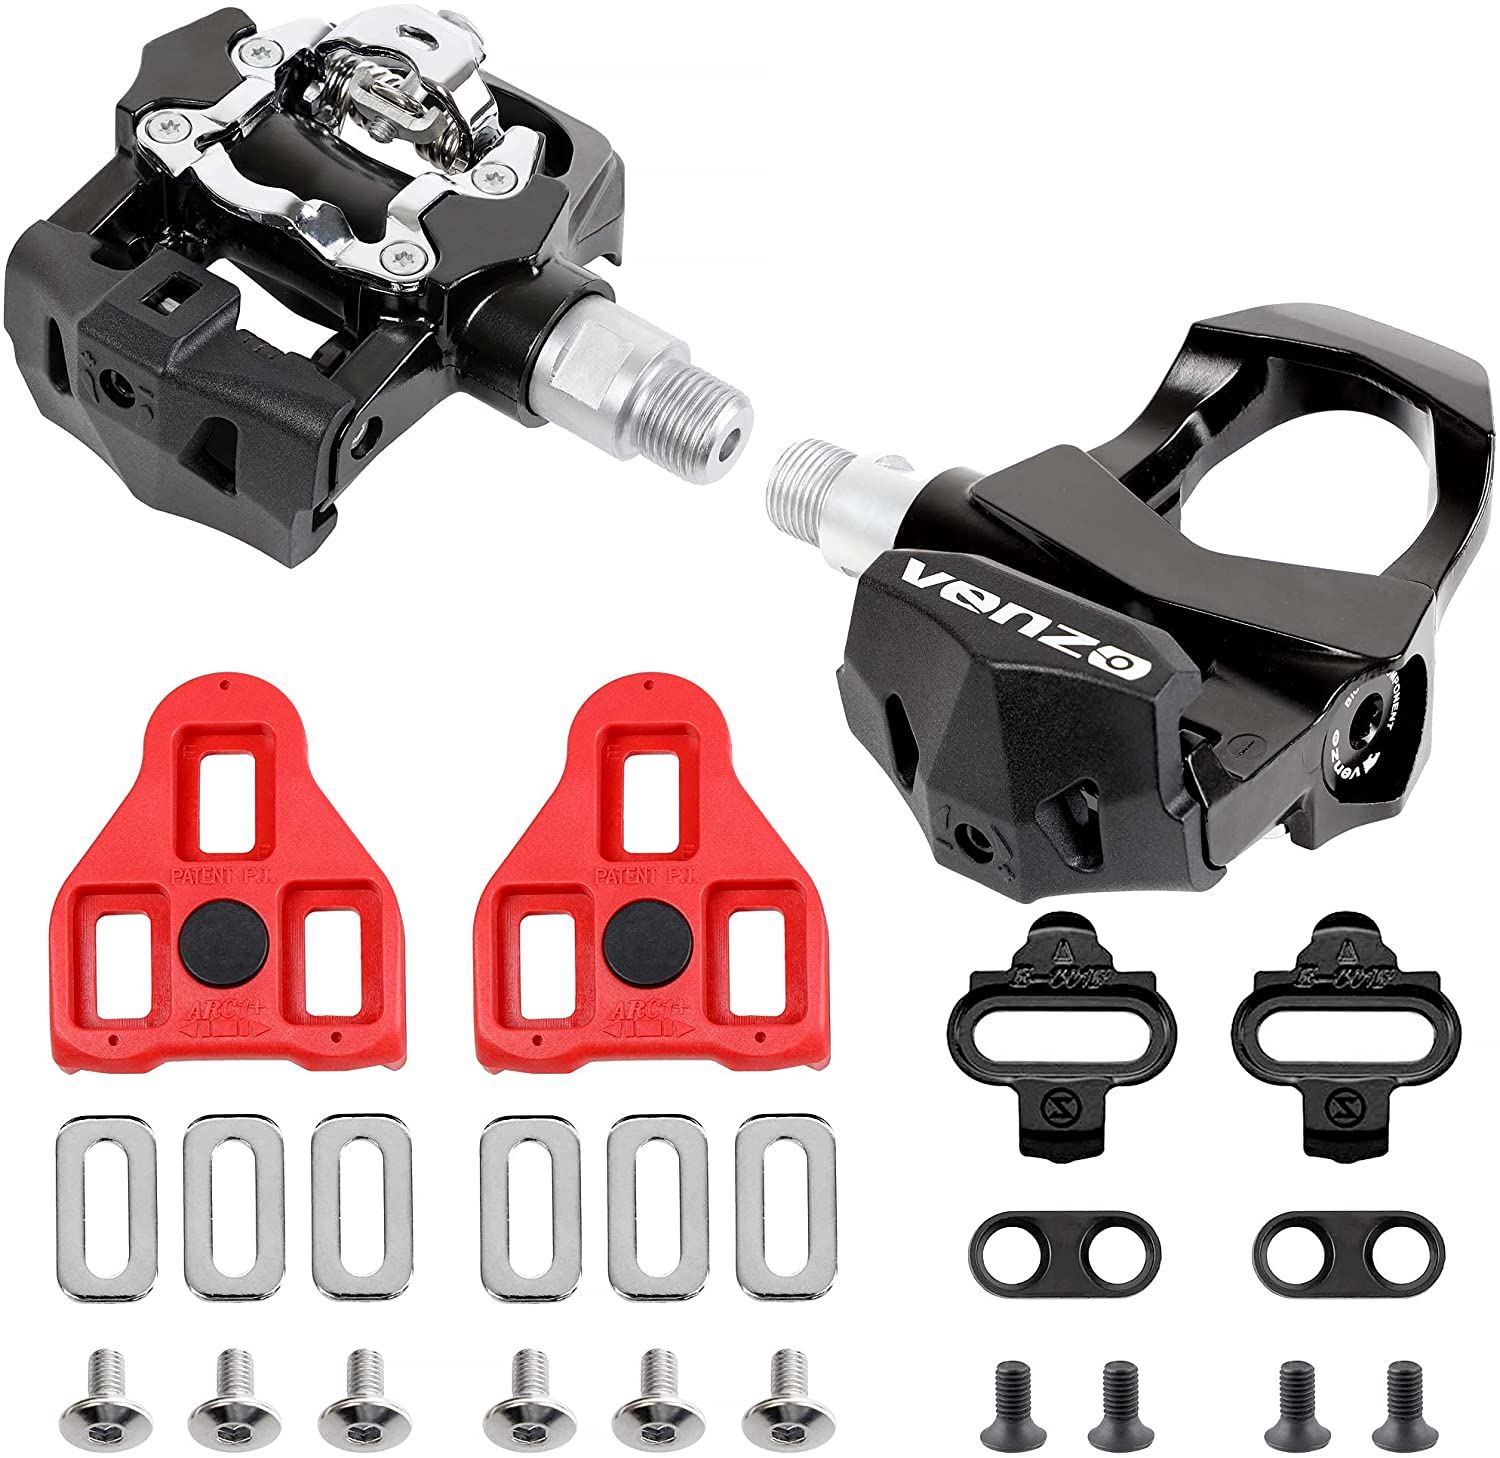 Venzo Sealed Fitness Exercise Indoor Bike CNC Pedals Compatible with Look ARC Delta & Shimano SPD 9/16" Compatible with Peloton.